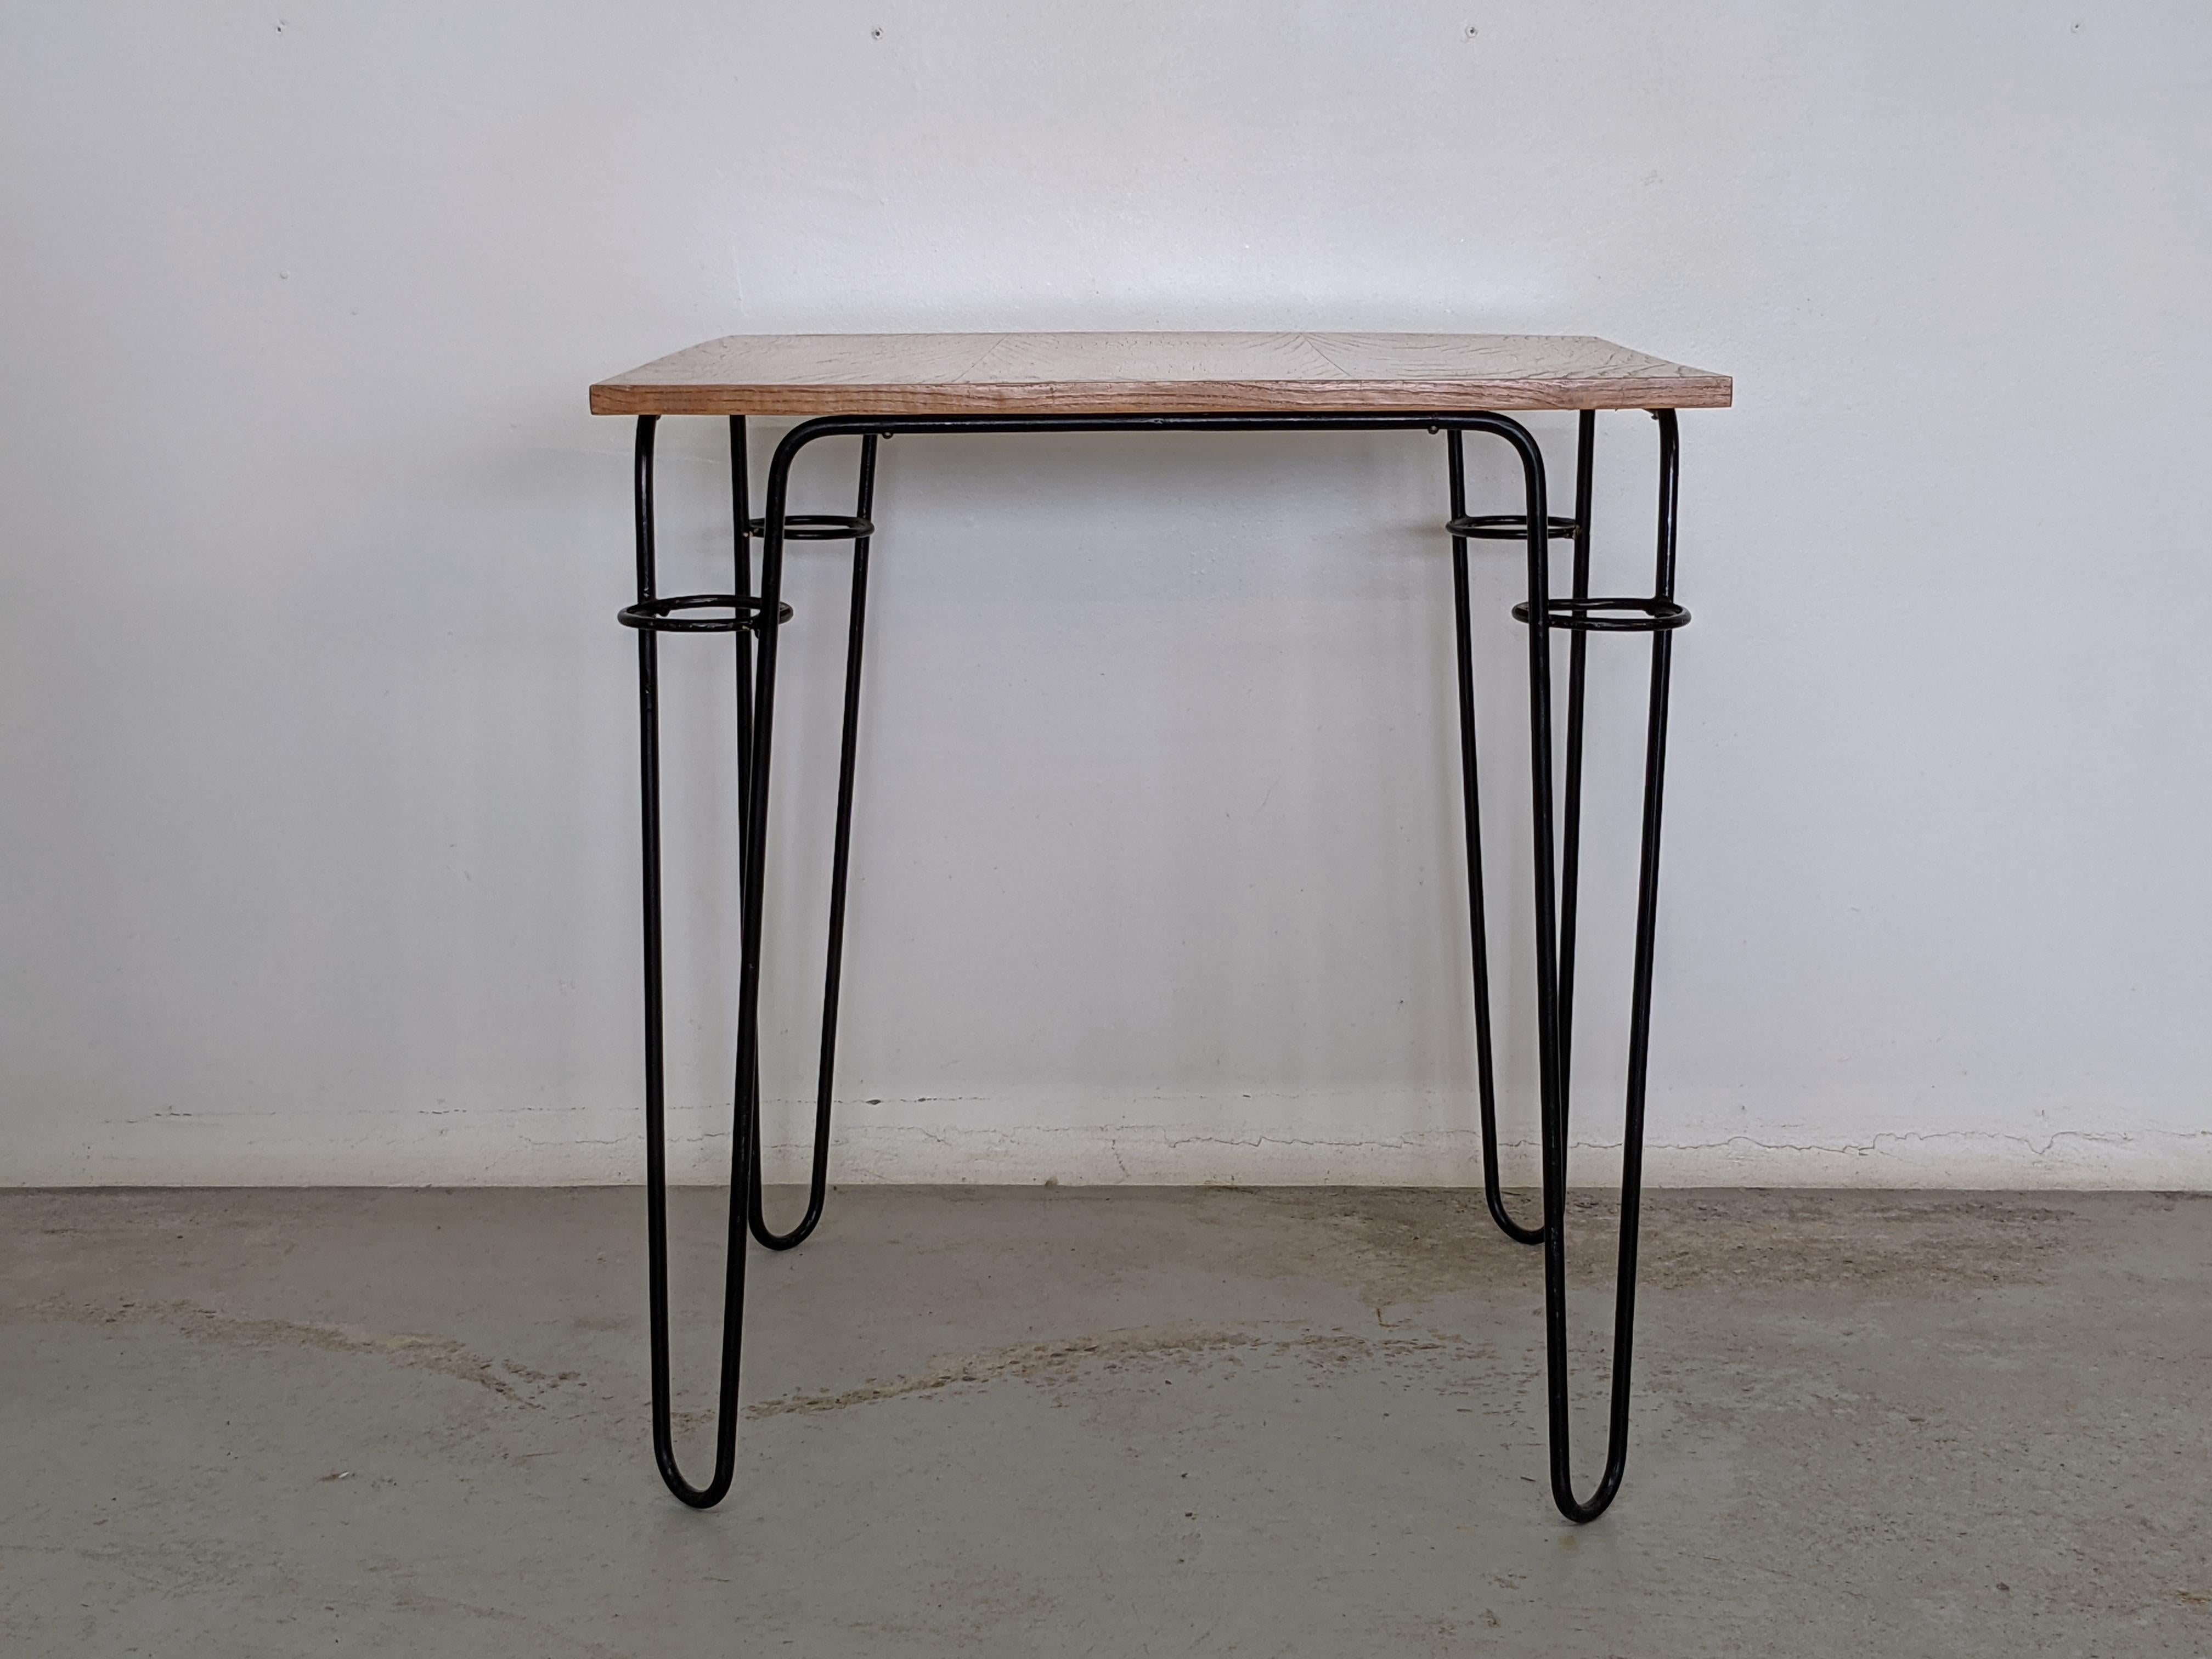 Mid-Century Modern Raoul Guys Square Table in Lacquered Metal and Ash Wood Veneer, France 1950s For Sale